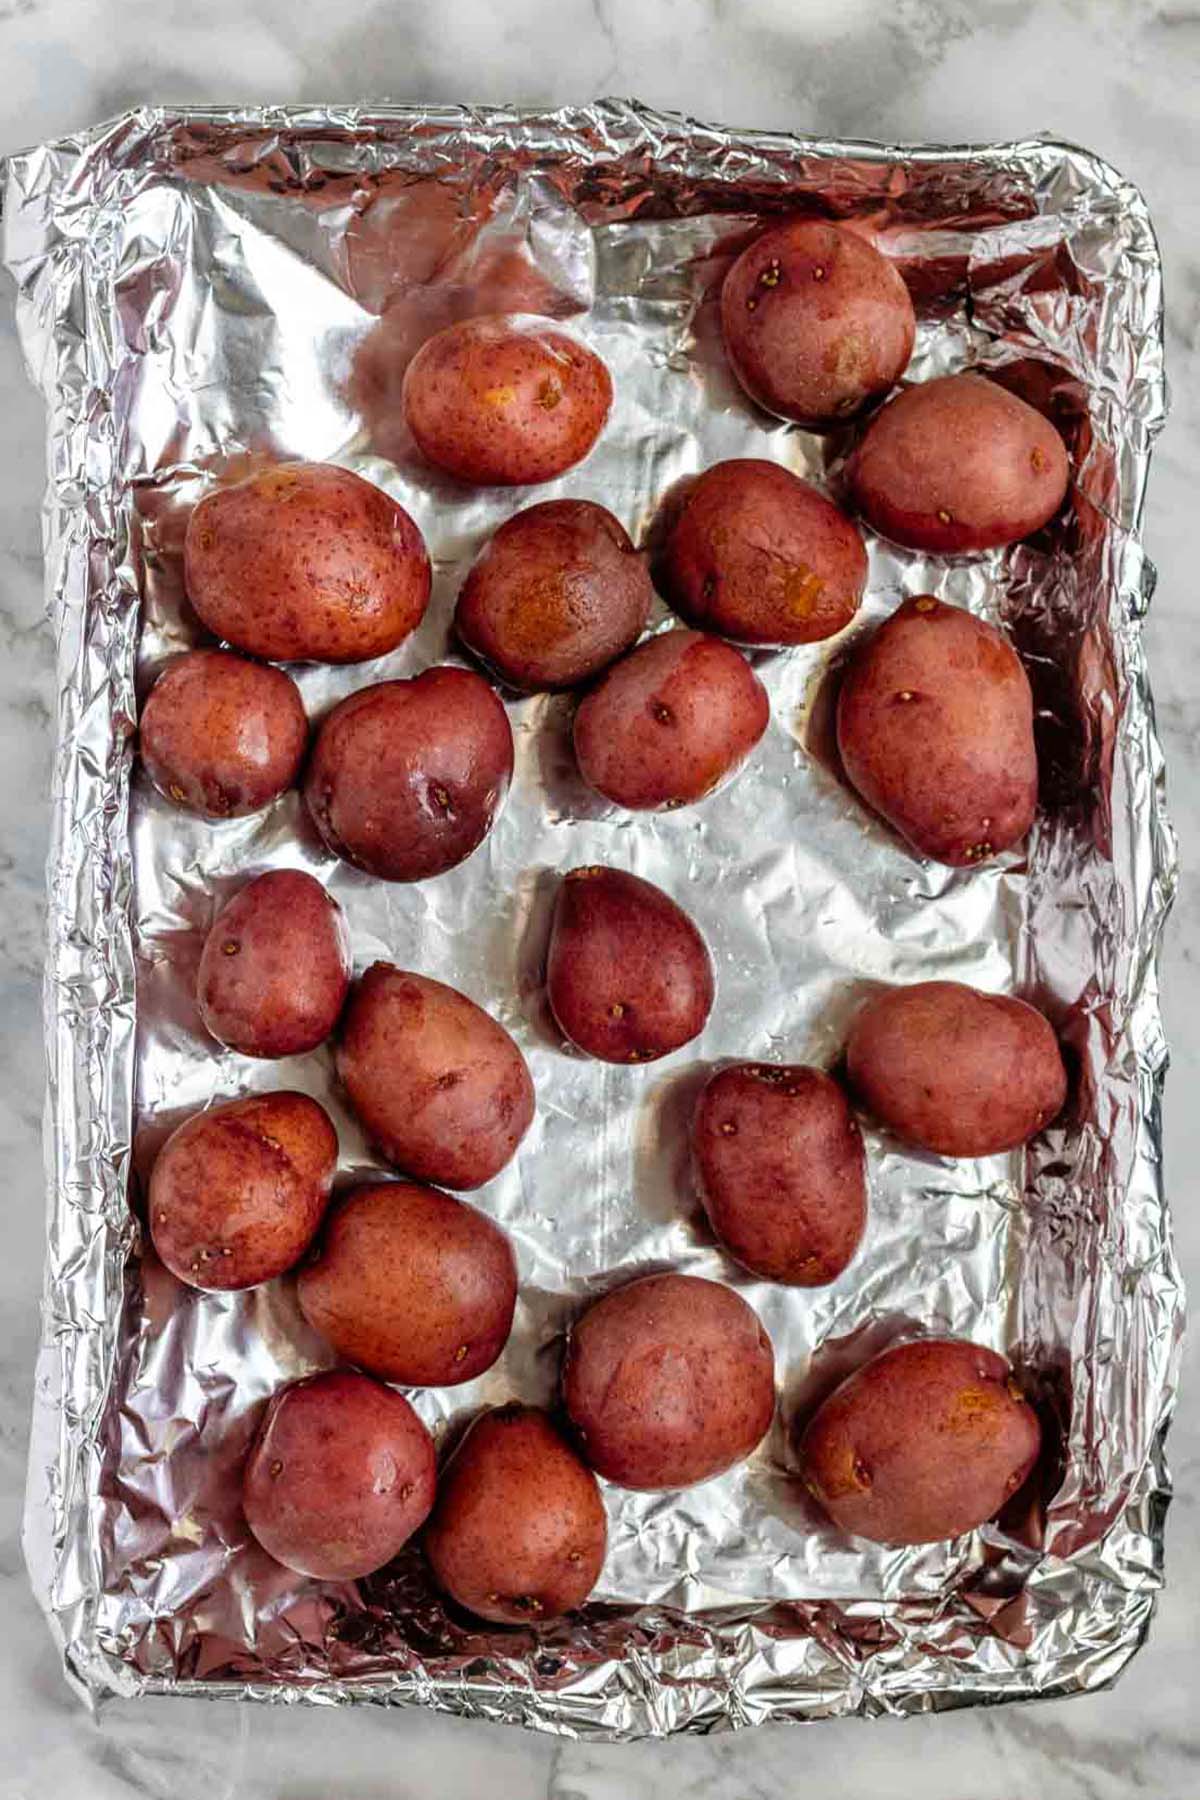 Baby potatoes on a foil-lined baking sheet.